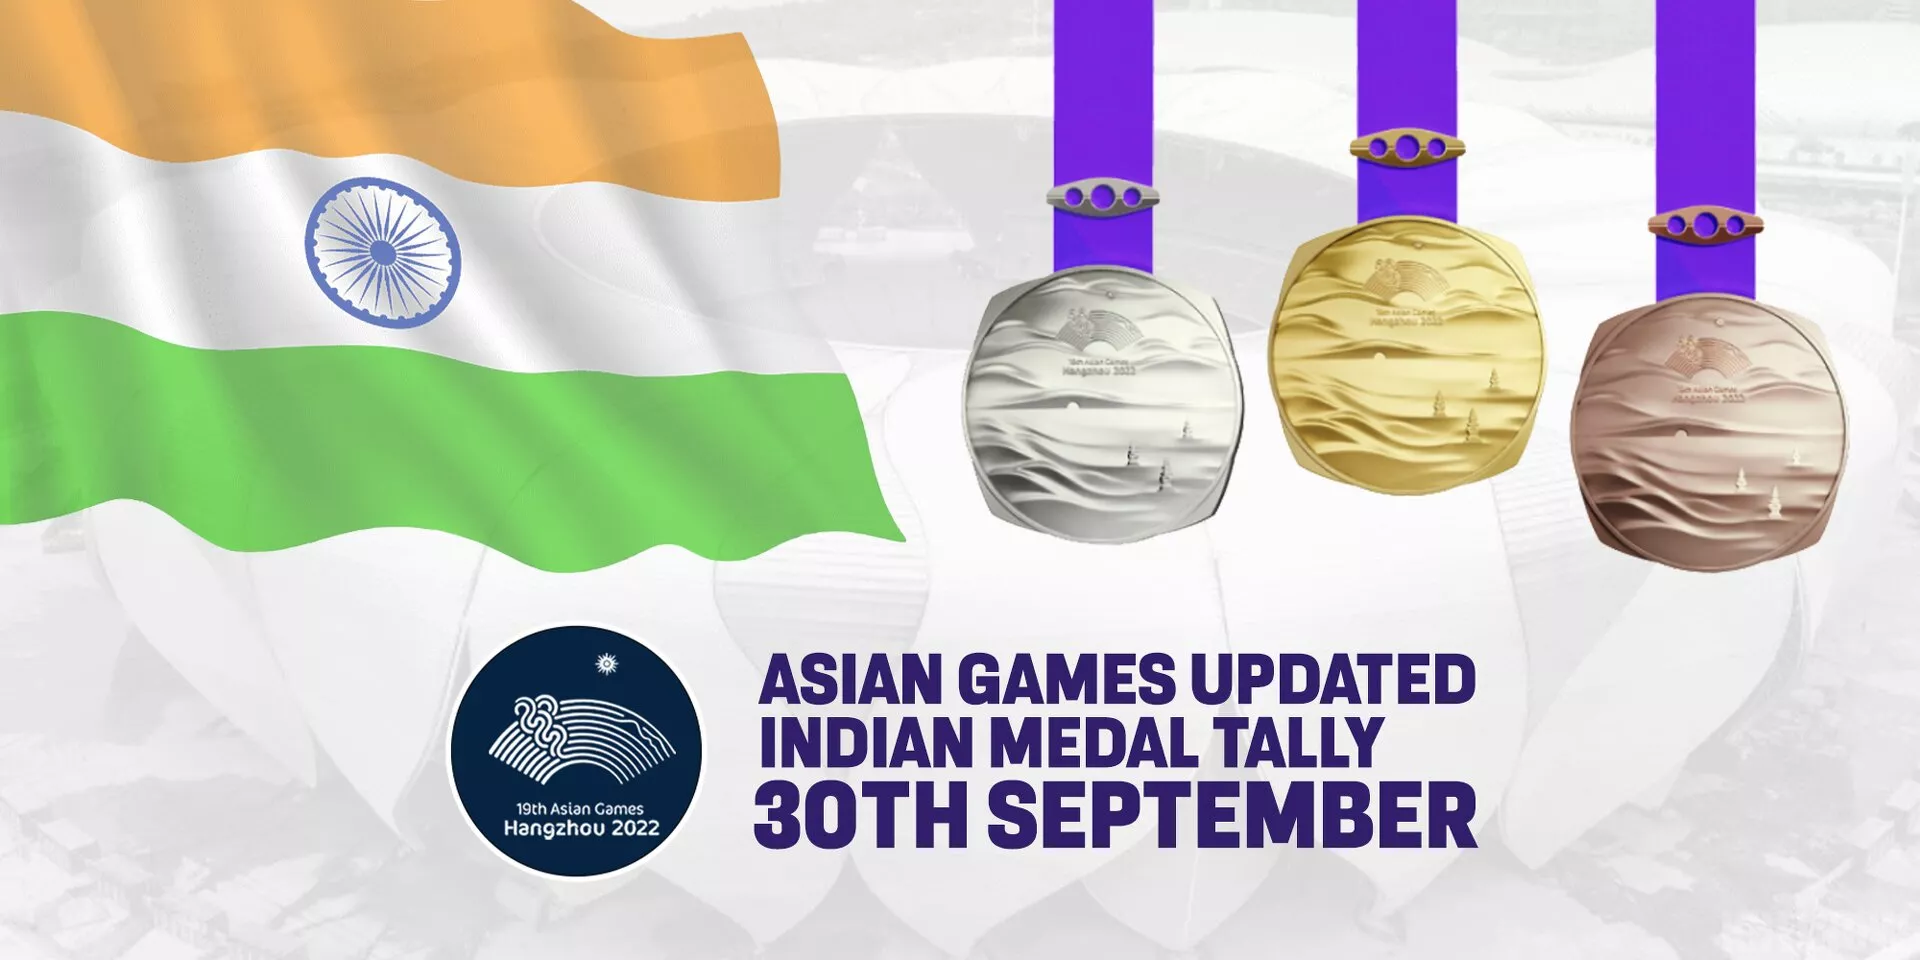 Asian Games 2023: India’s medal tally after Day 7, 30th September